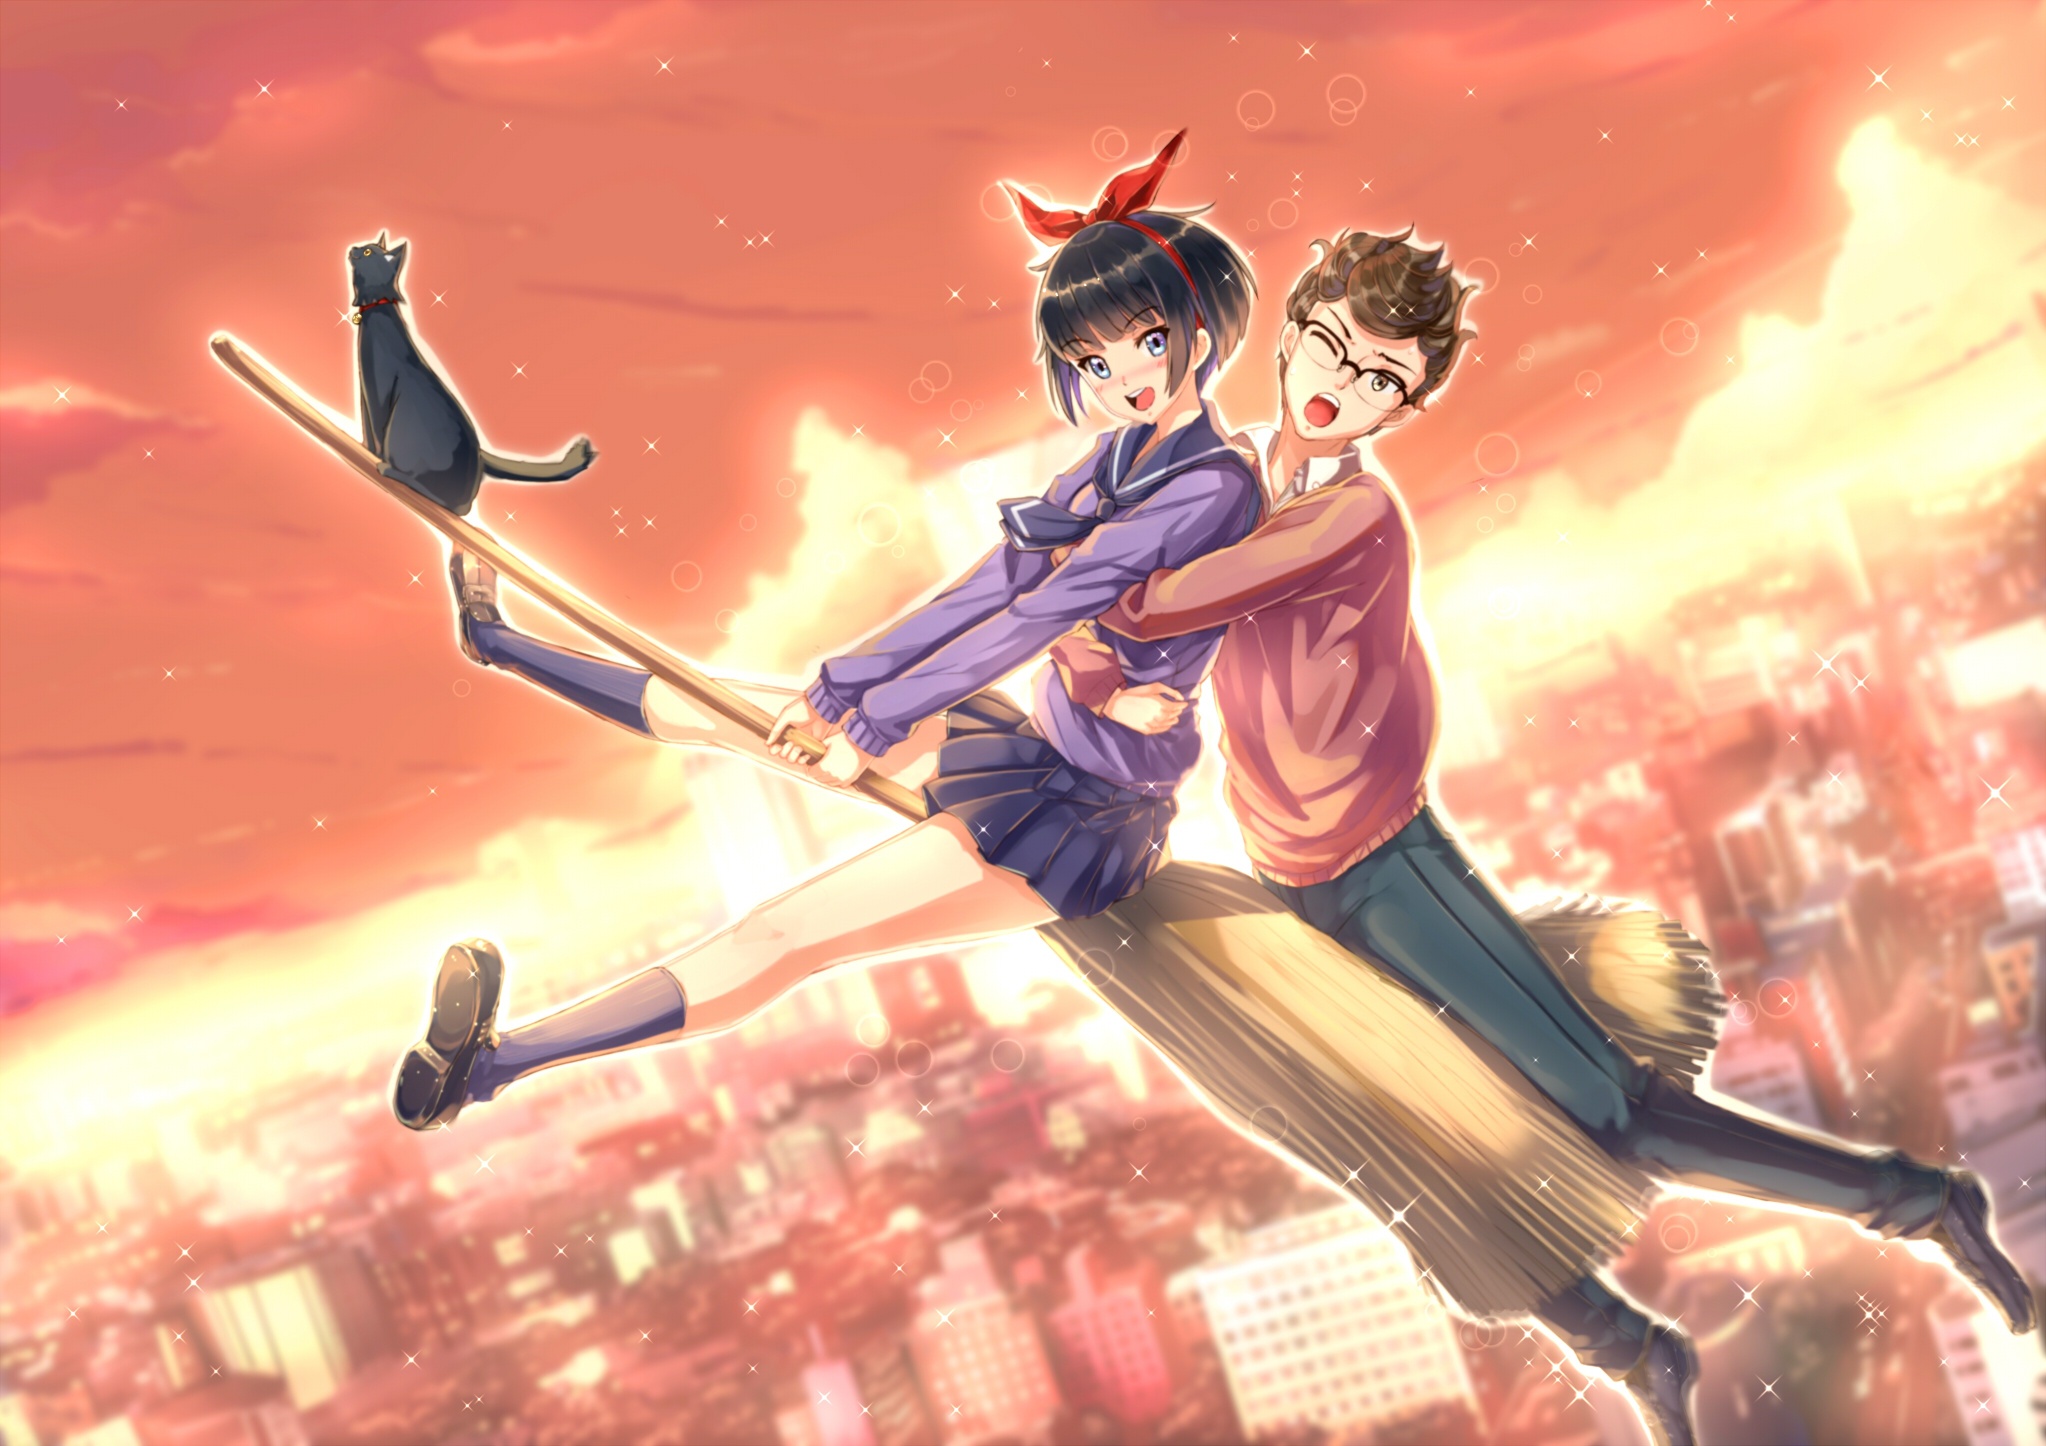 Kikis Delivery Service Kiki Witch Witches Broom Flying Broom Cats Short Hair Hair Ornament City Open 2046x1446